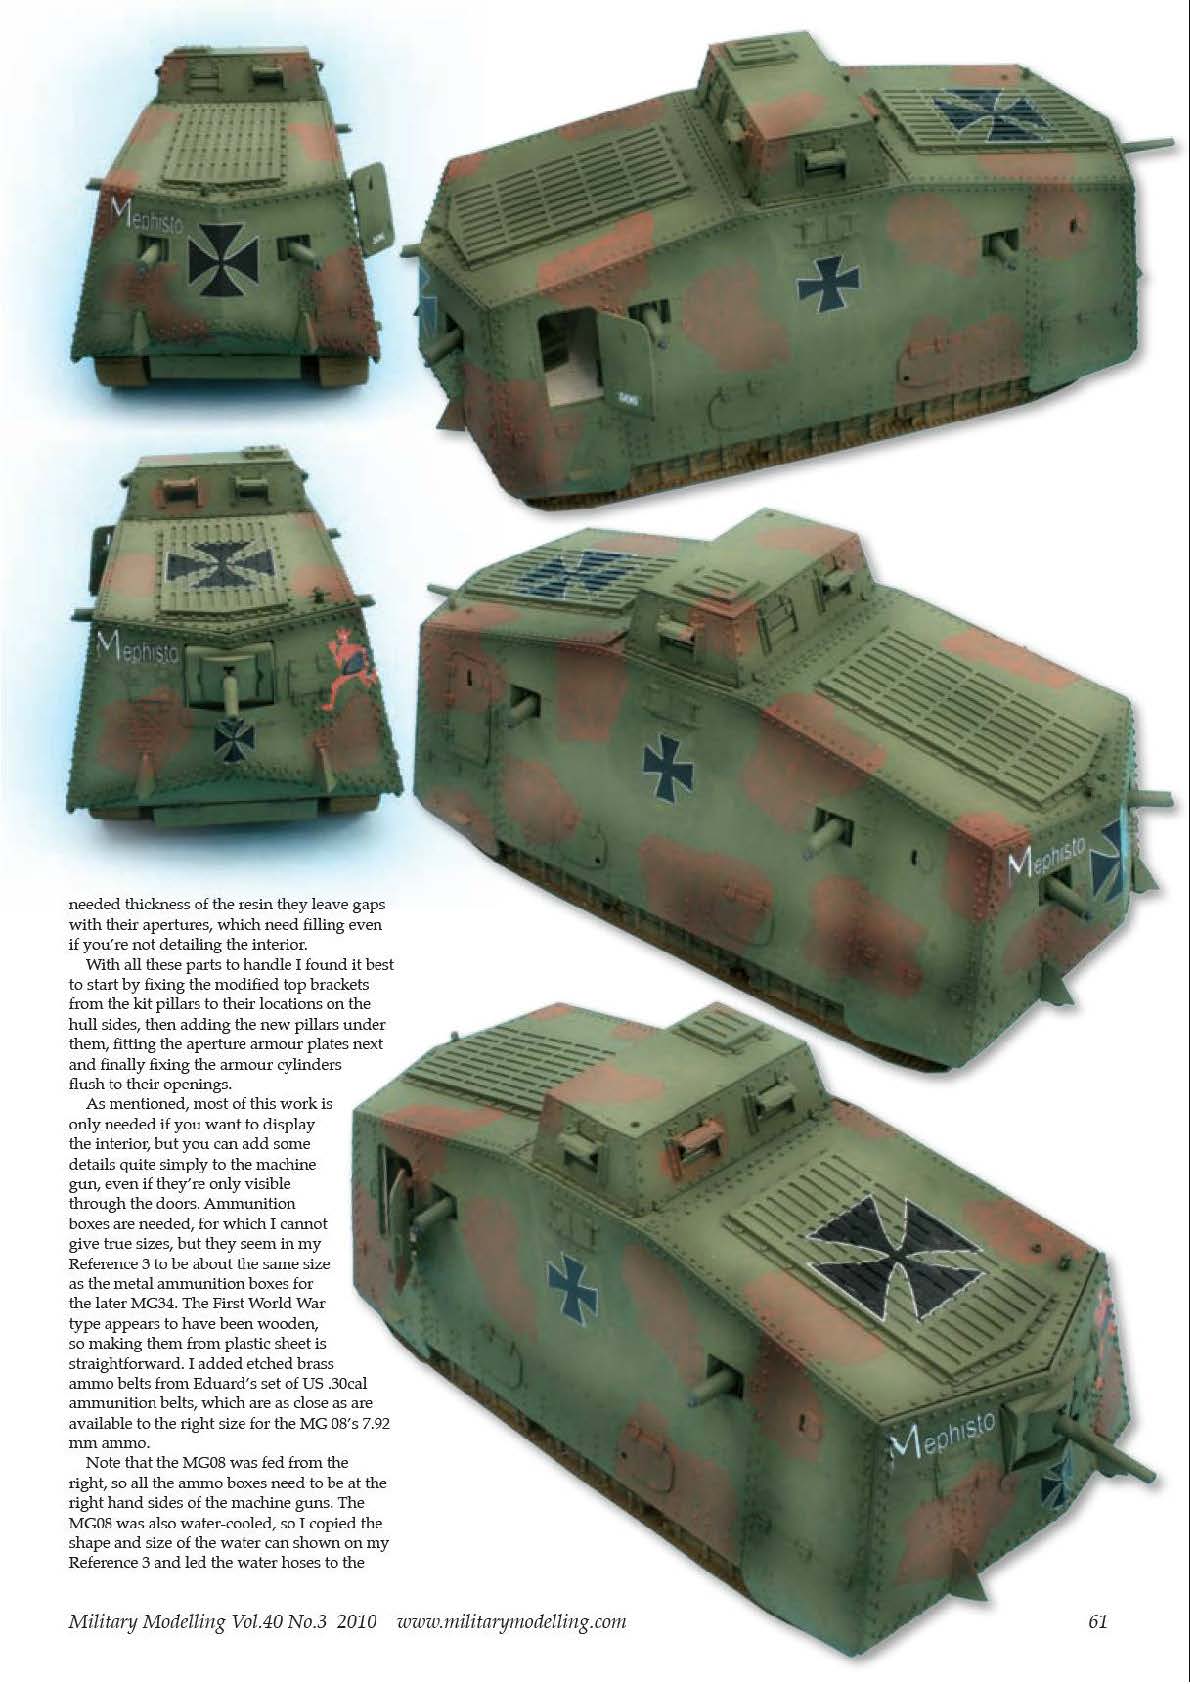 Military Modelling Special Collectors` Edition Nine (Vol.40 Iss.3) [2010]-2_Страница_06.jpg